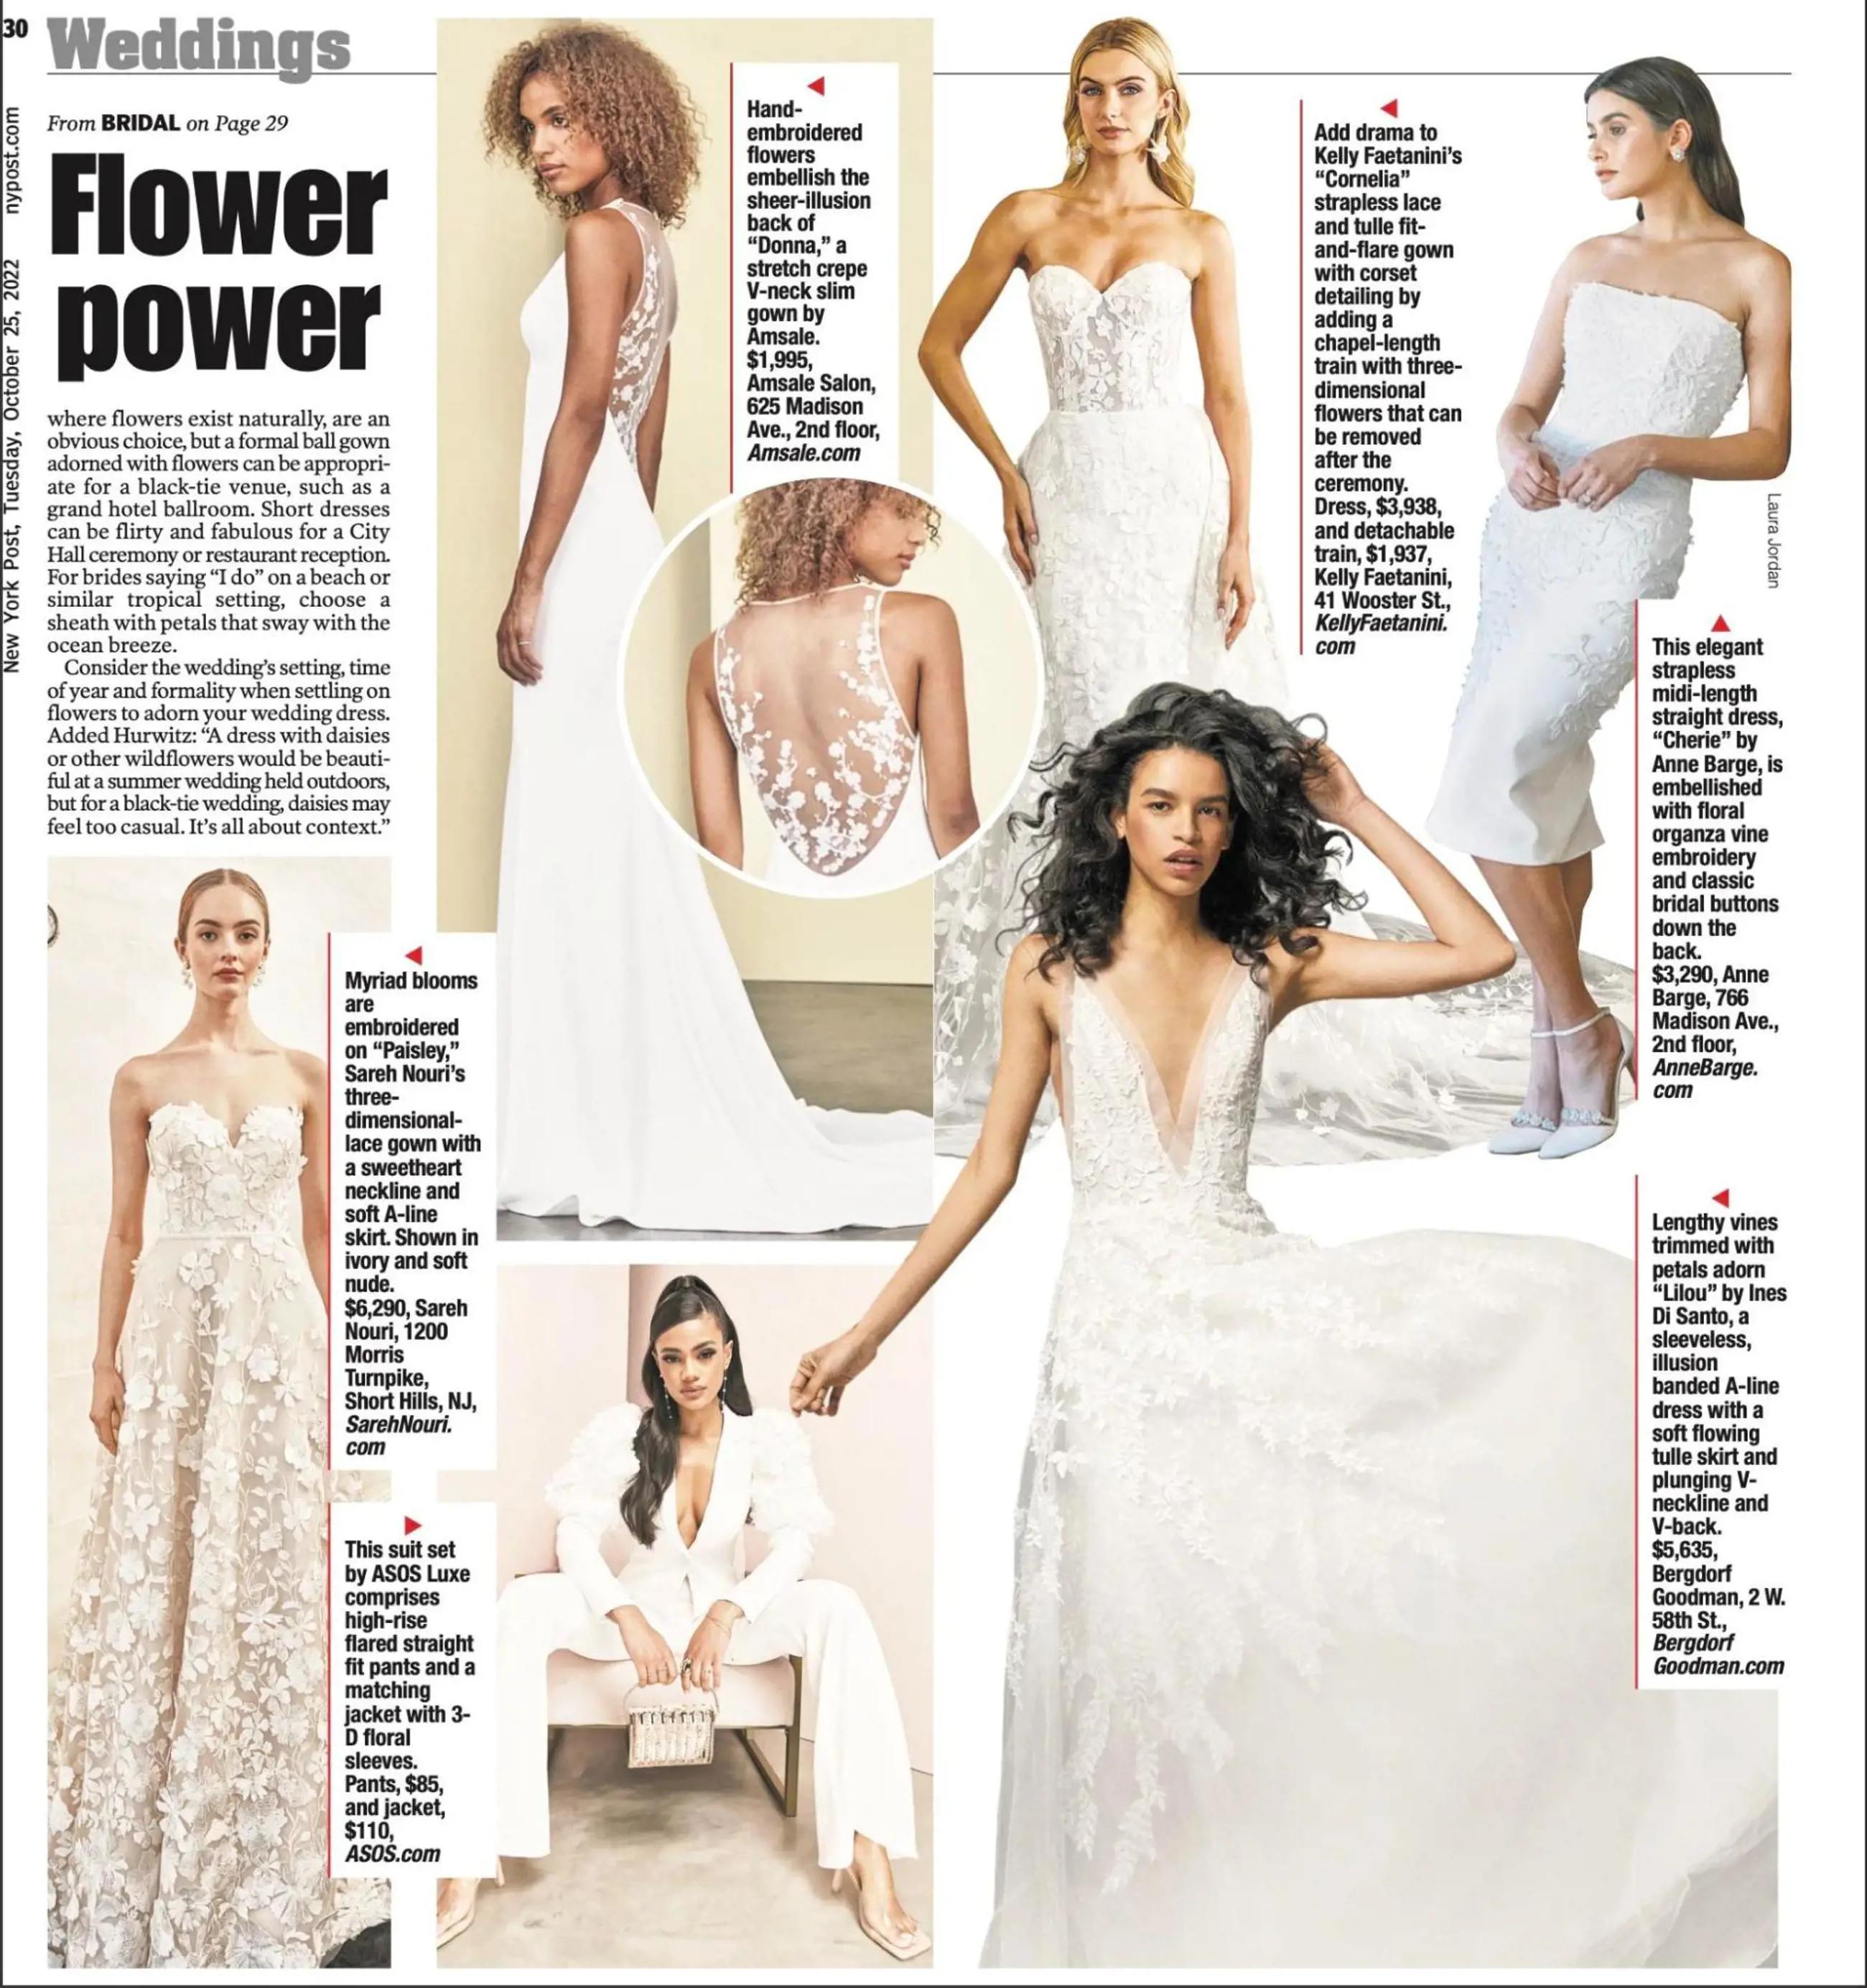 In the Press: Kelly Faetanini New York Post Feature Image